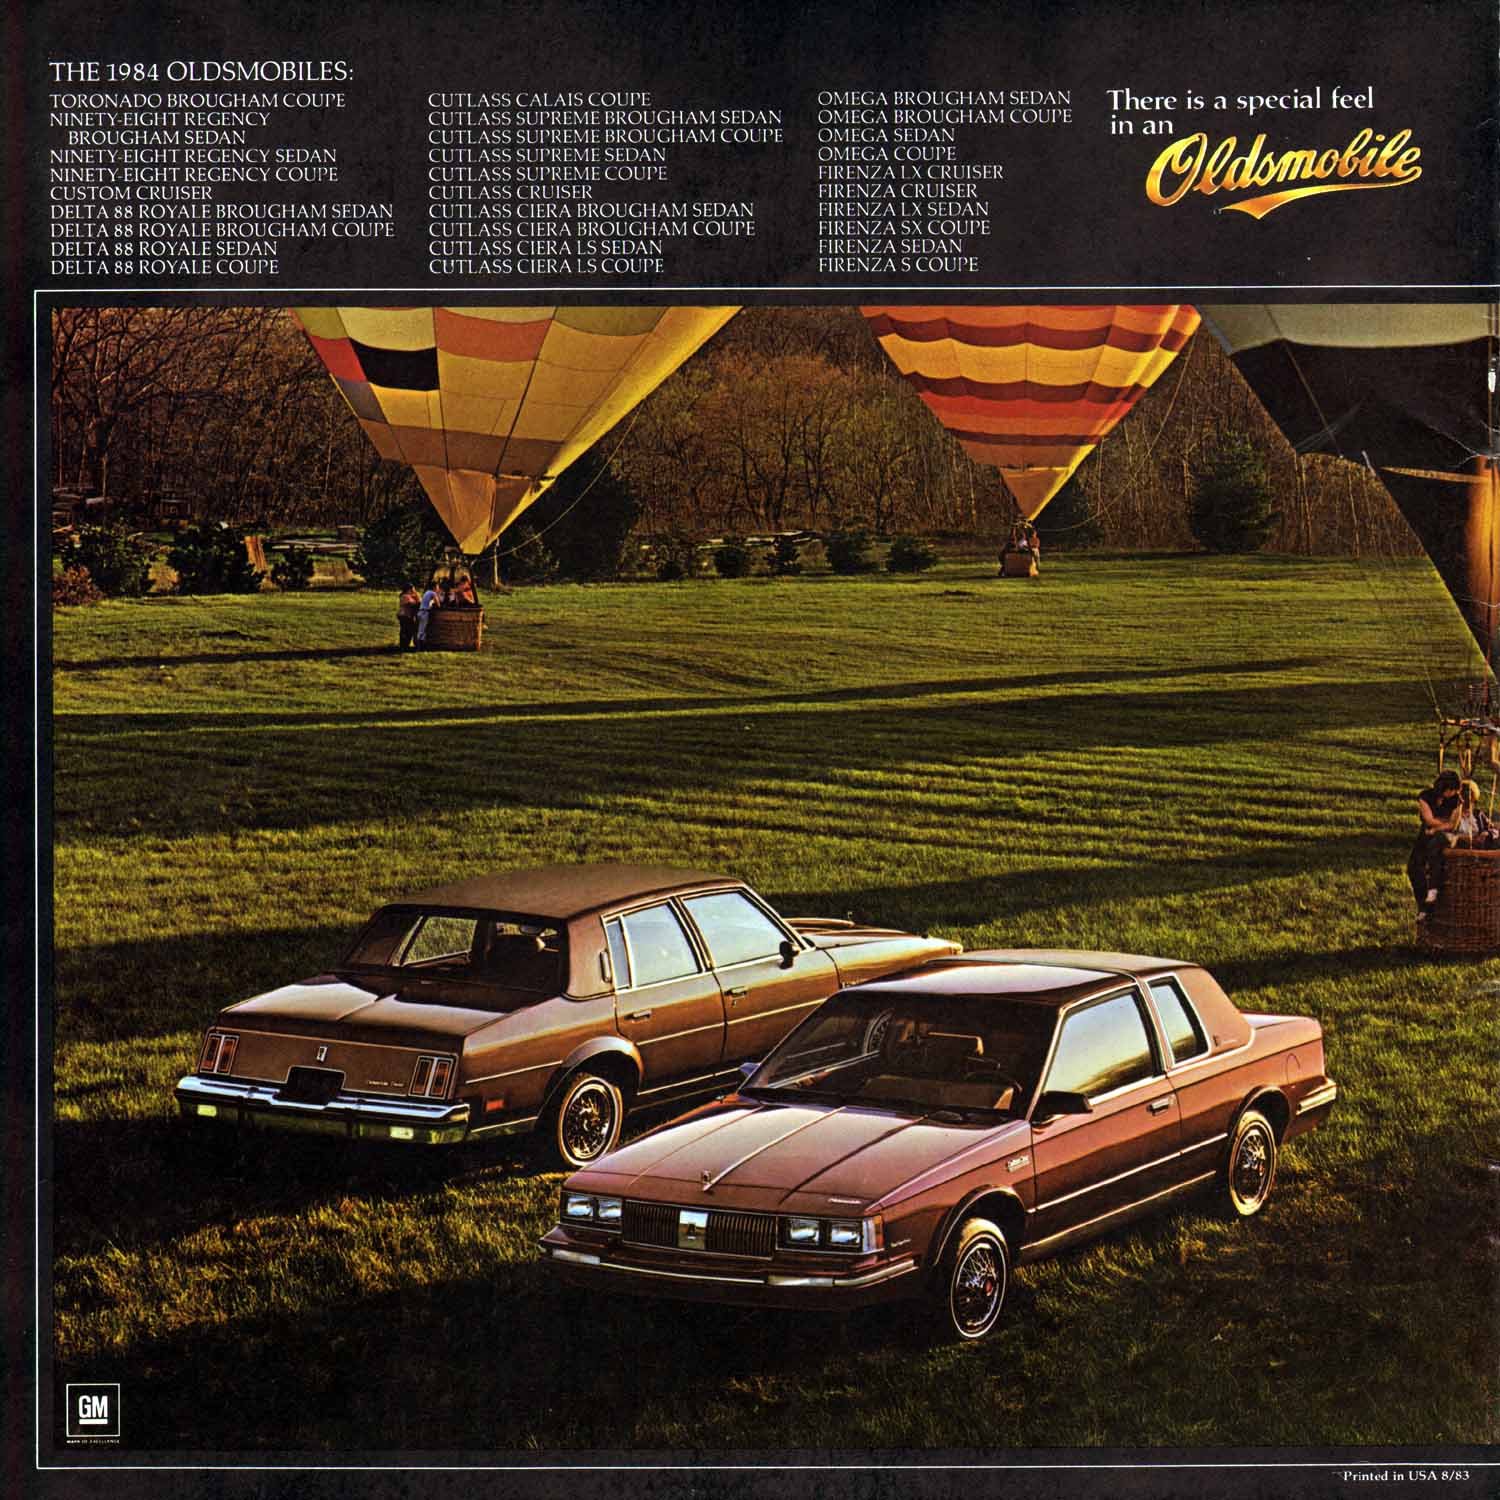 1984 Oldsmobile Mid-Size Brochure Page 2